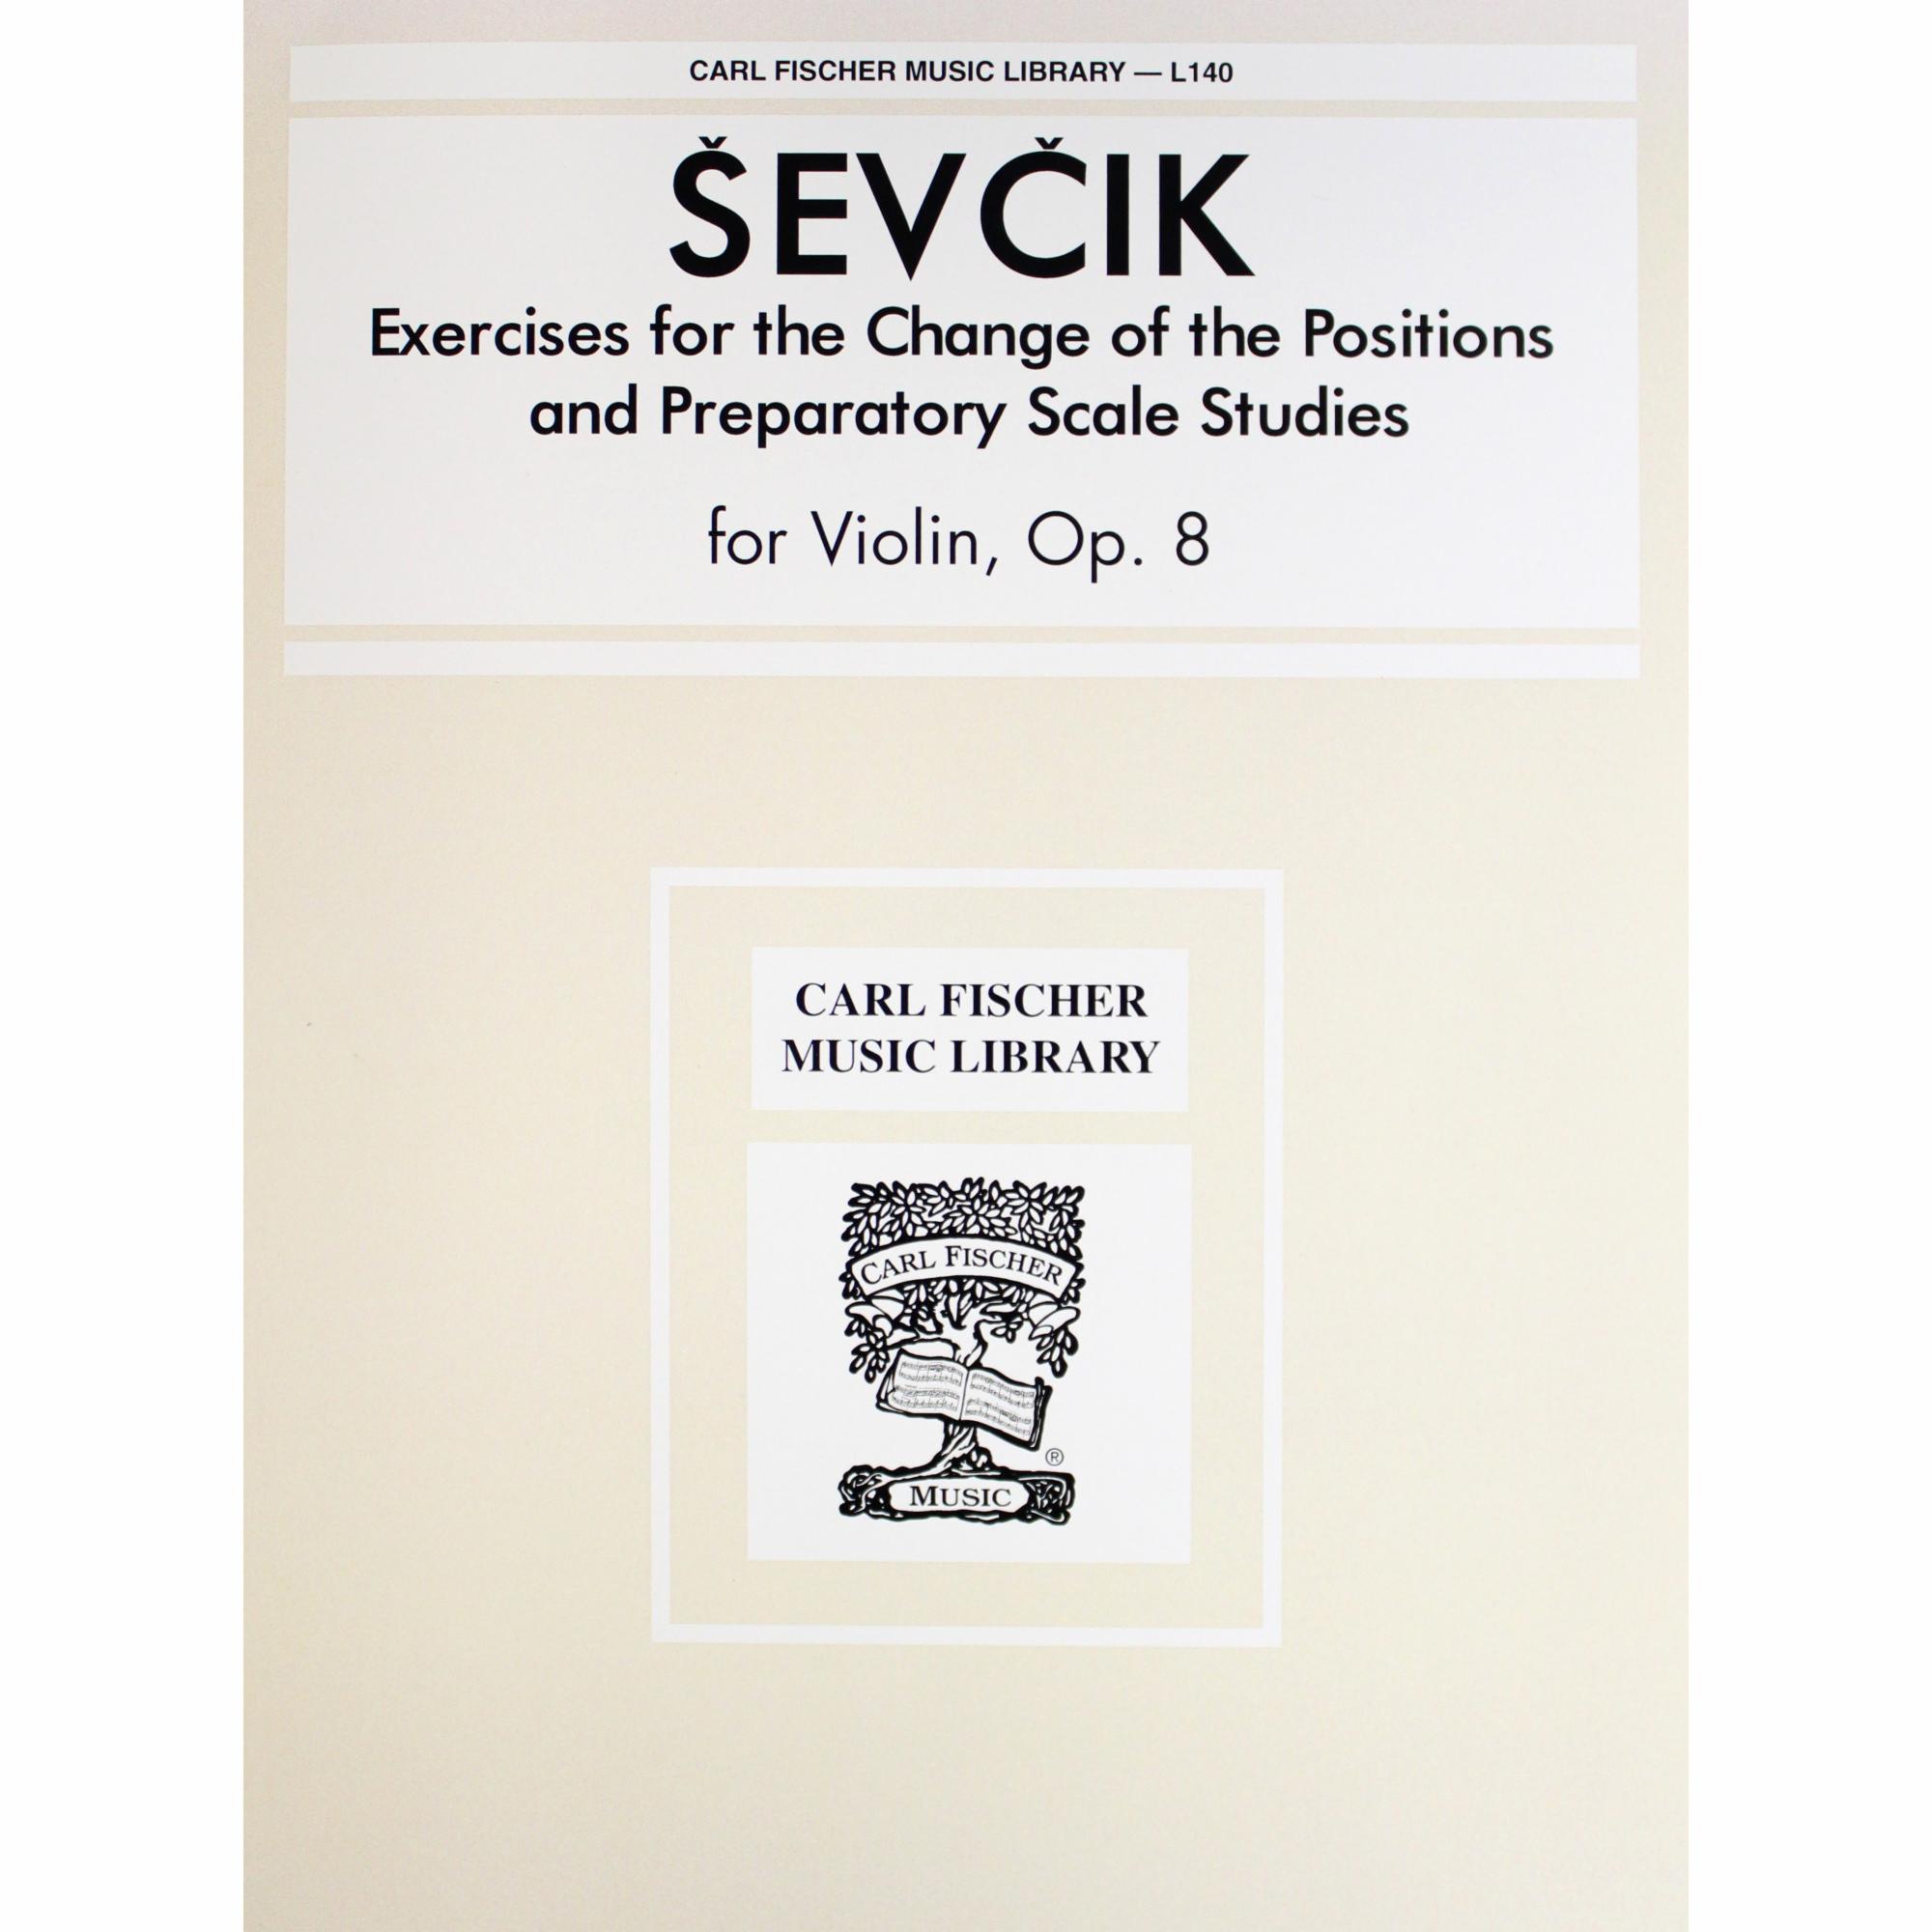 Sevcik -- Exercises for the Change of the Positions and Preparatory Scale Studies, Op. 8 for Violin